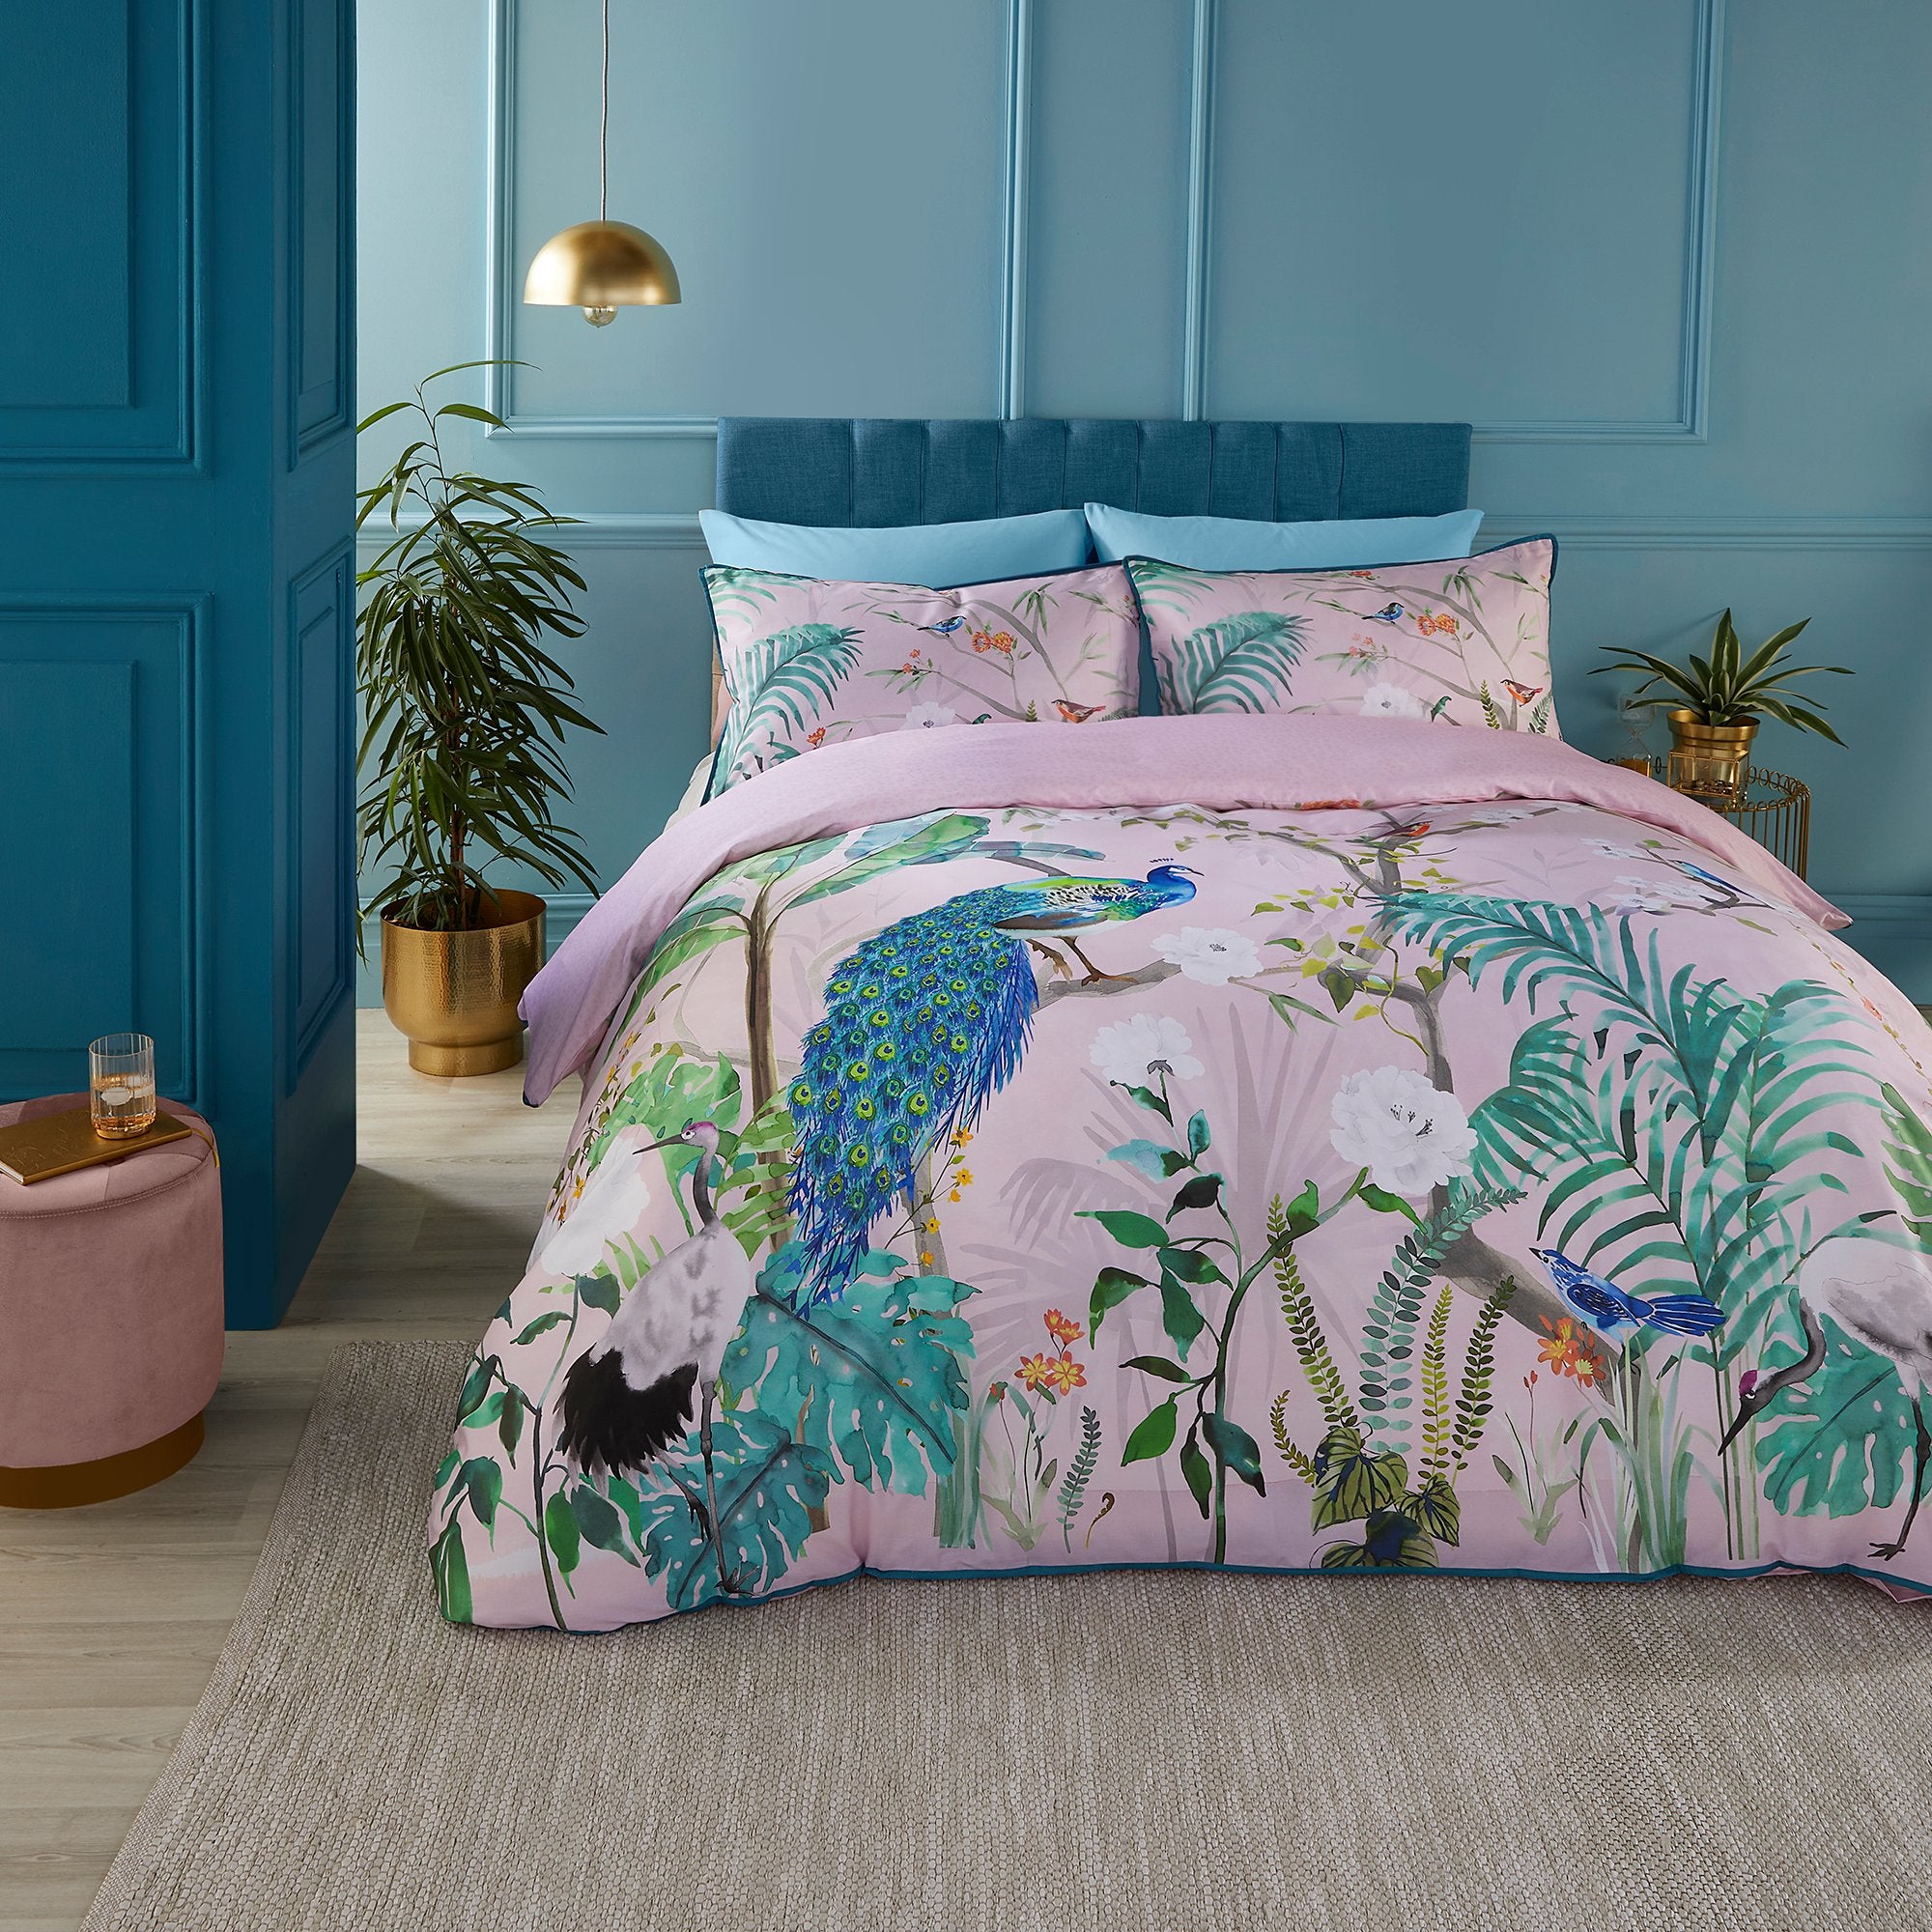 Duvet Cover Set Peacock Jungle by Soiree in Pink